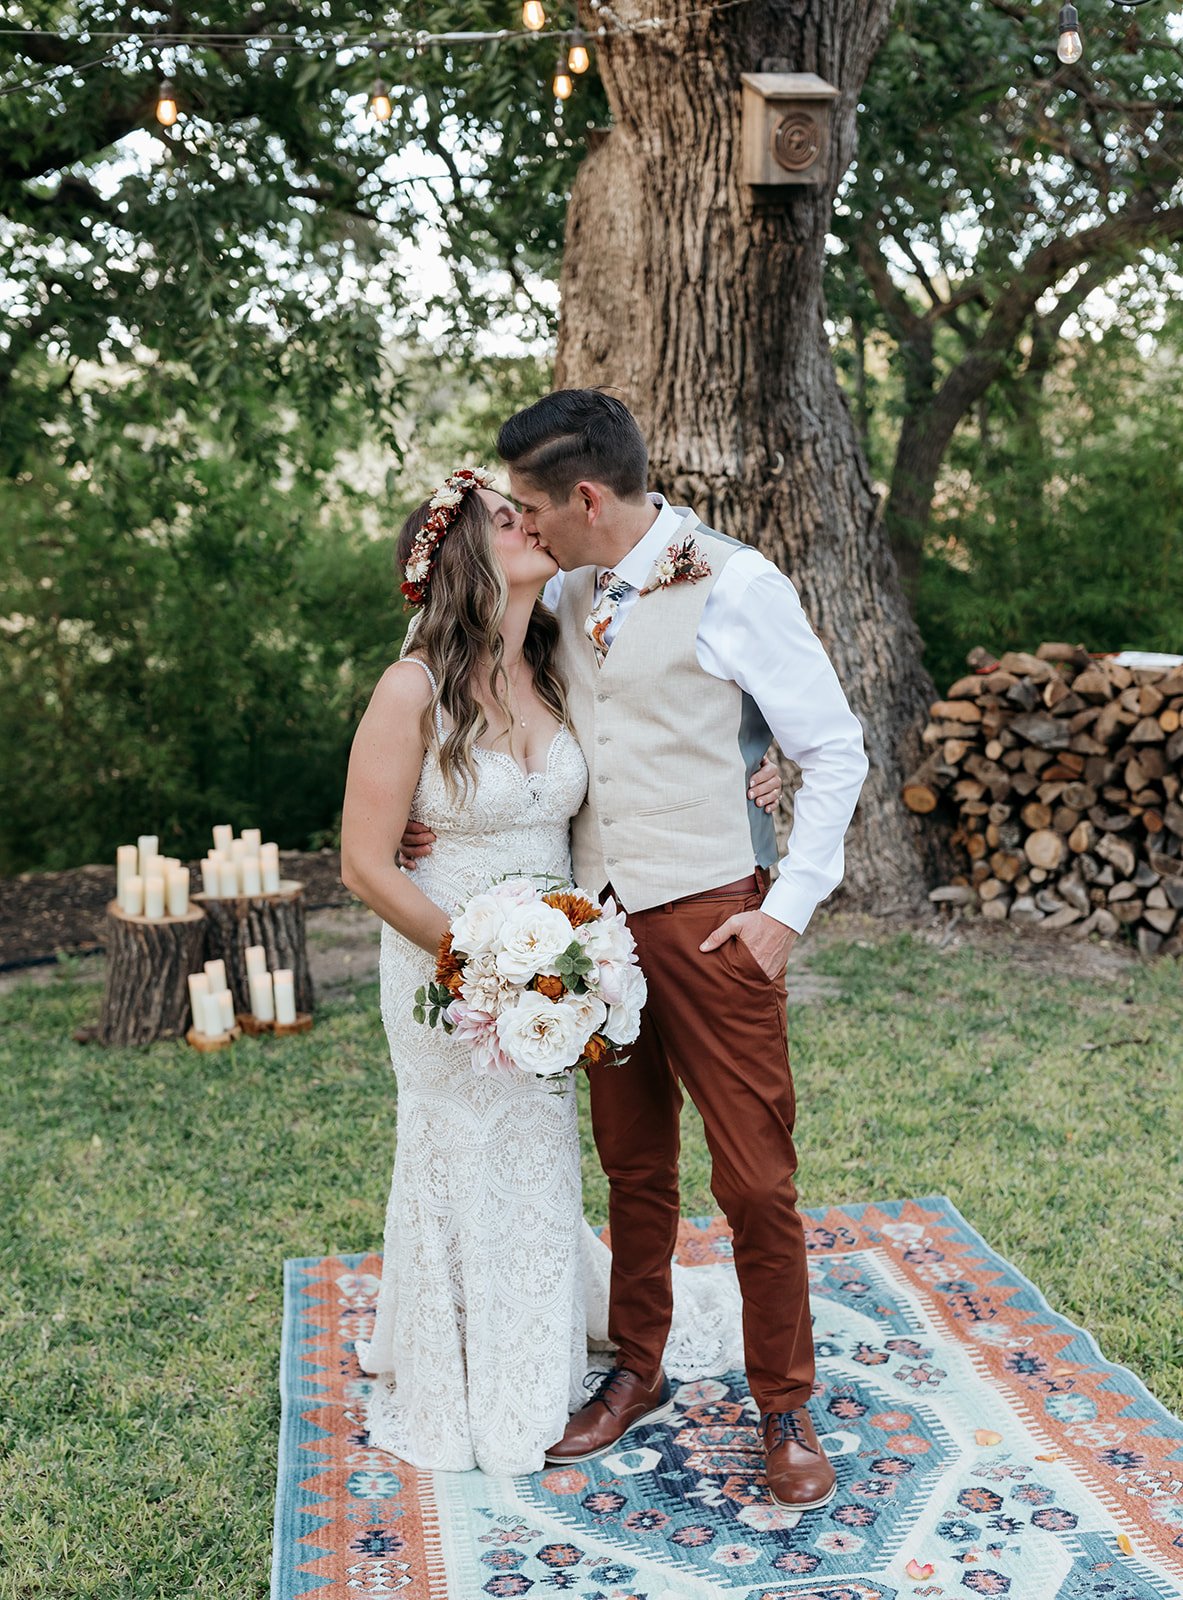 I loved all the rustic Autumn details that were so natural at this venue